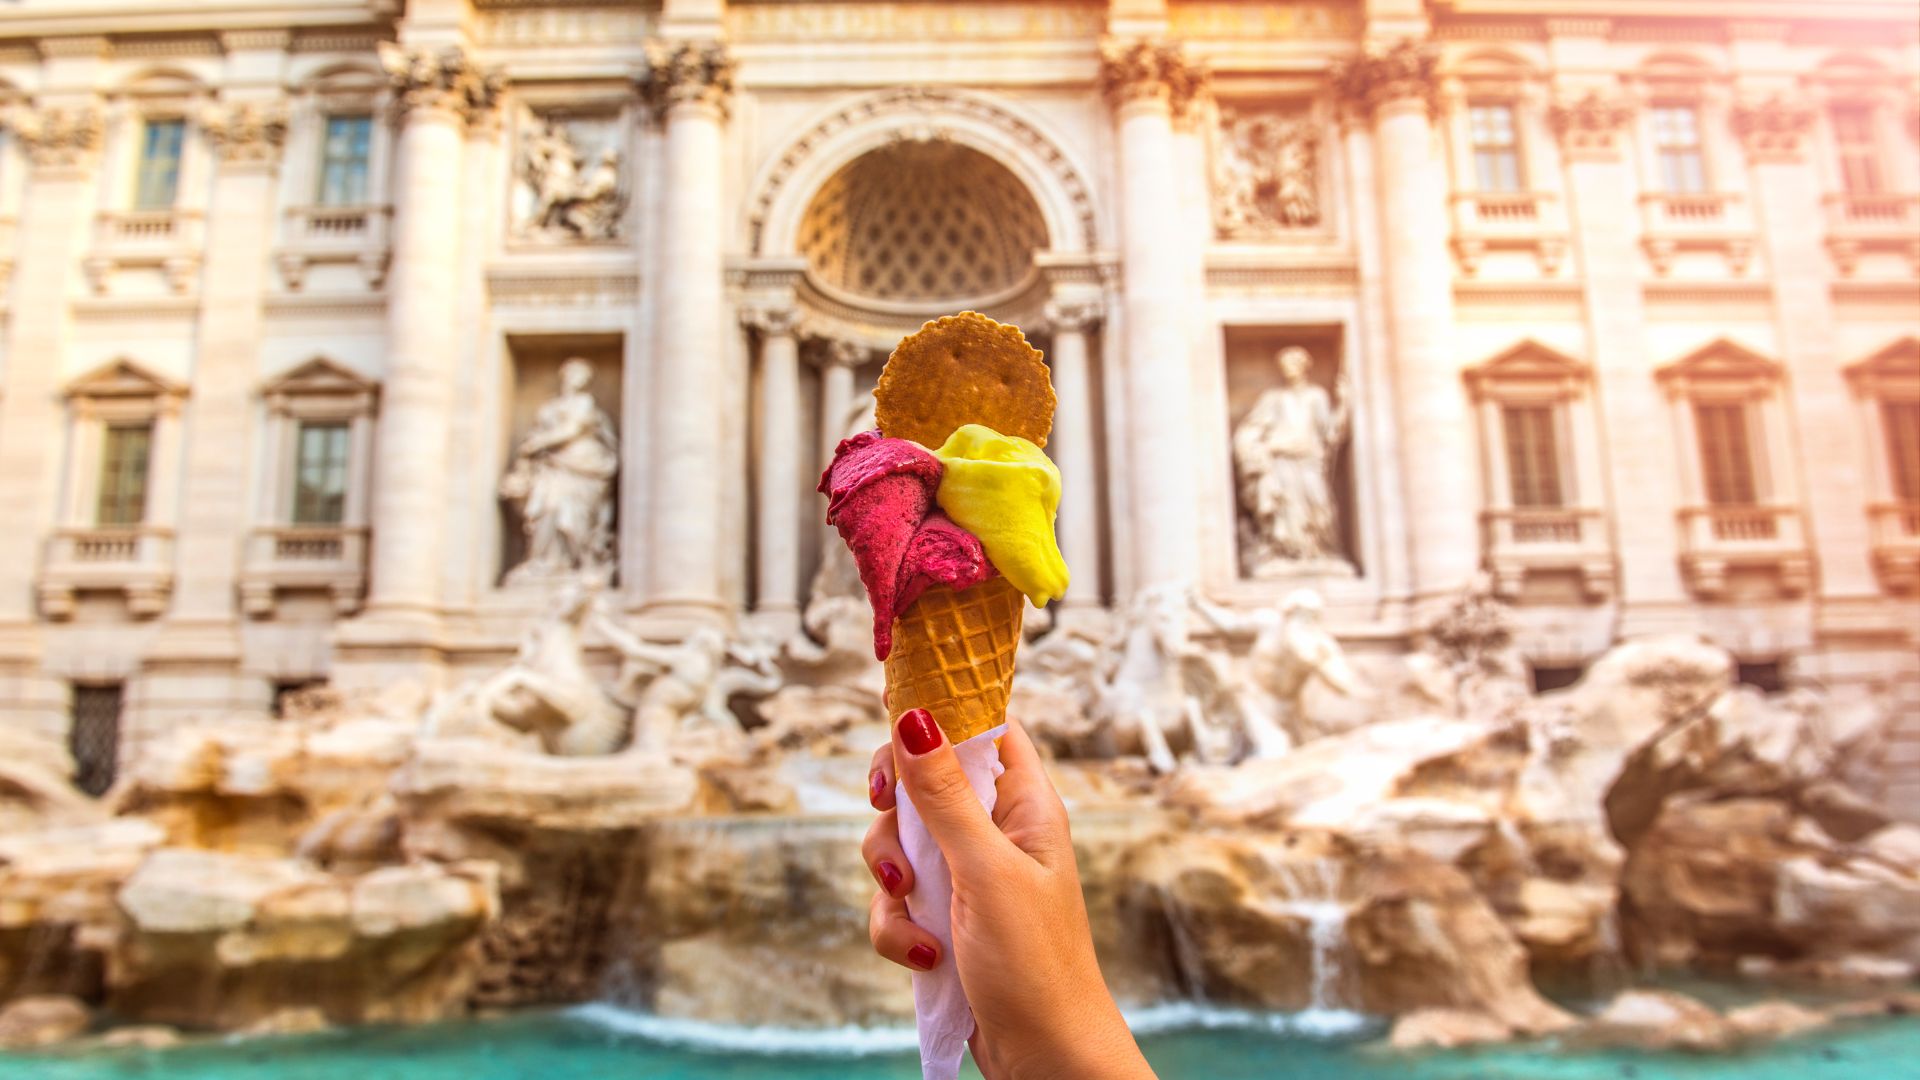 A hand holding an ice cream cone in front of Trevi fountain in Rome.